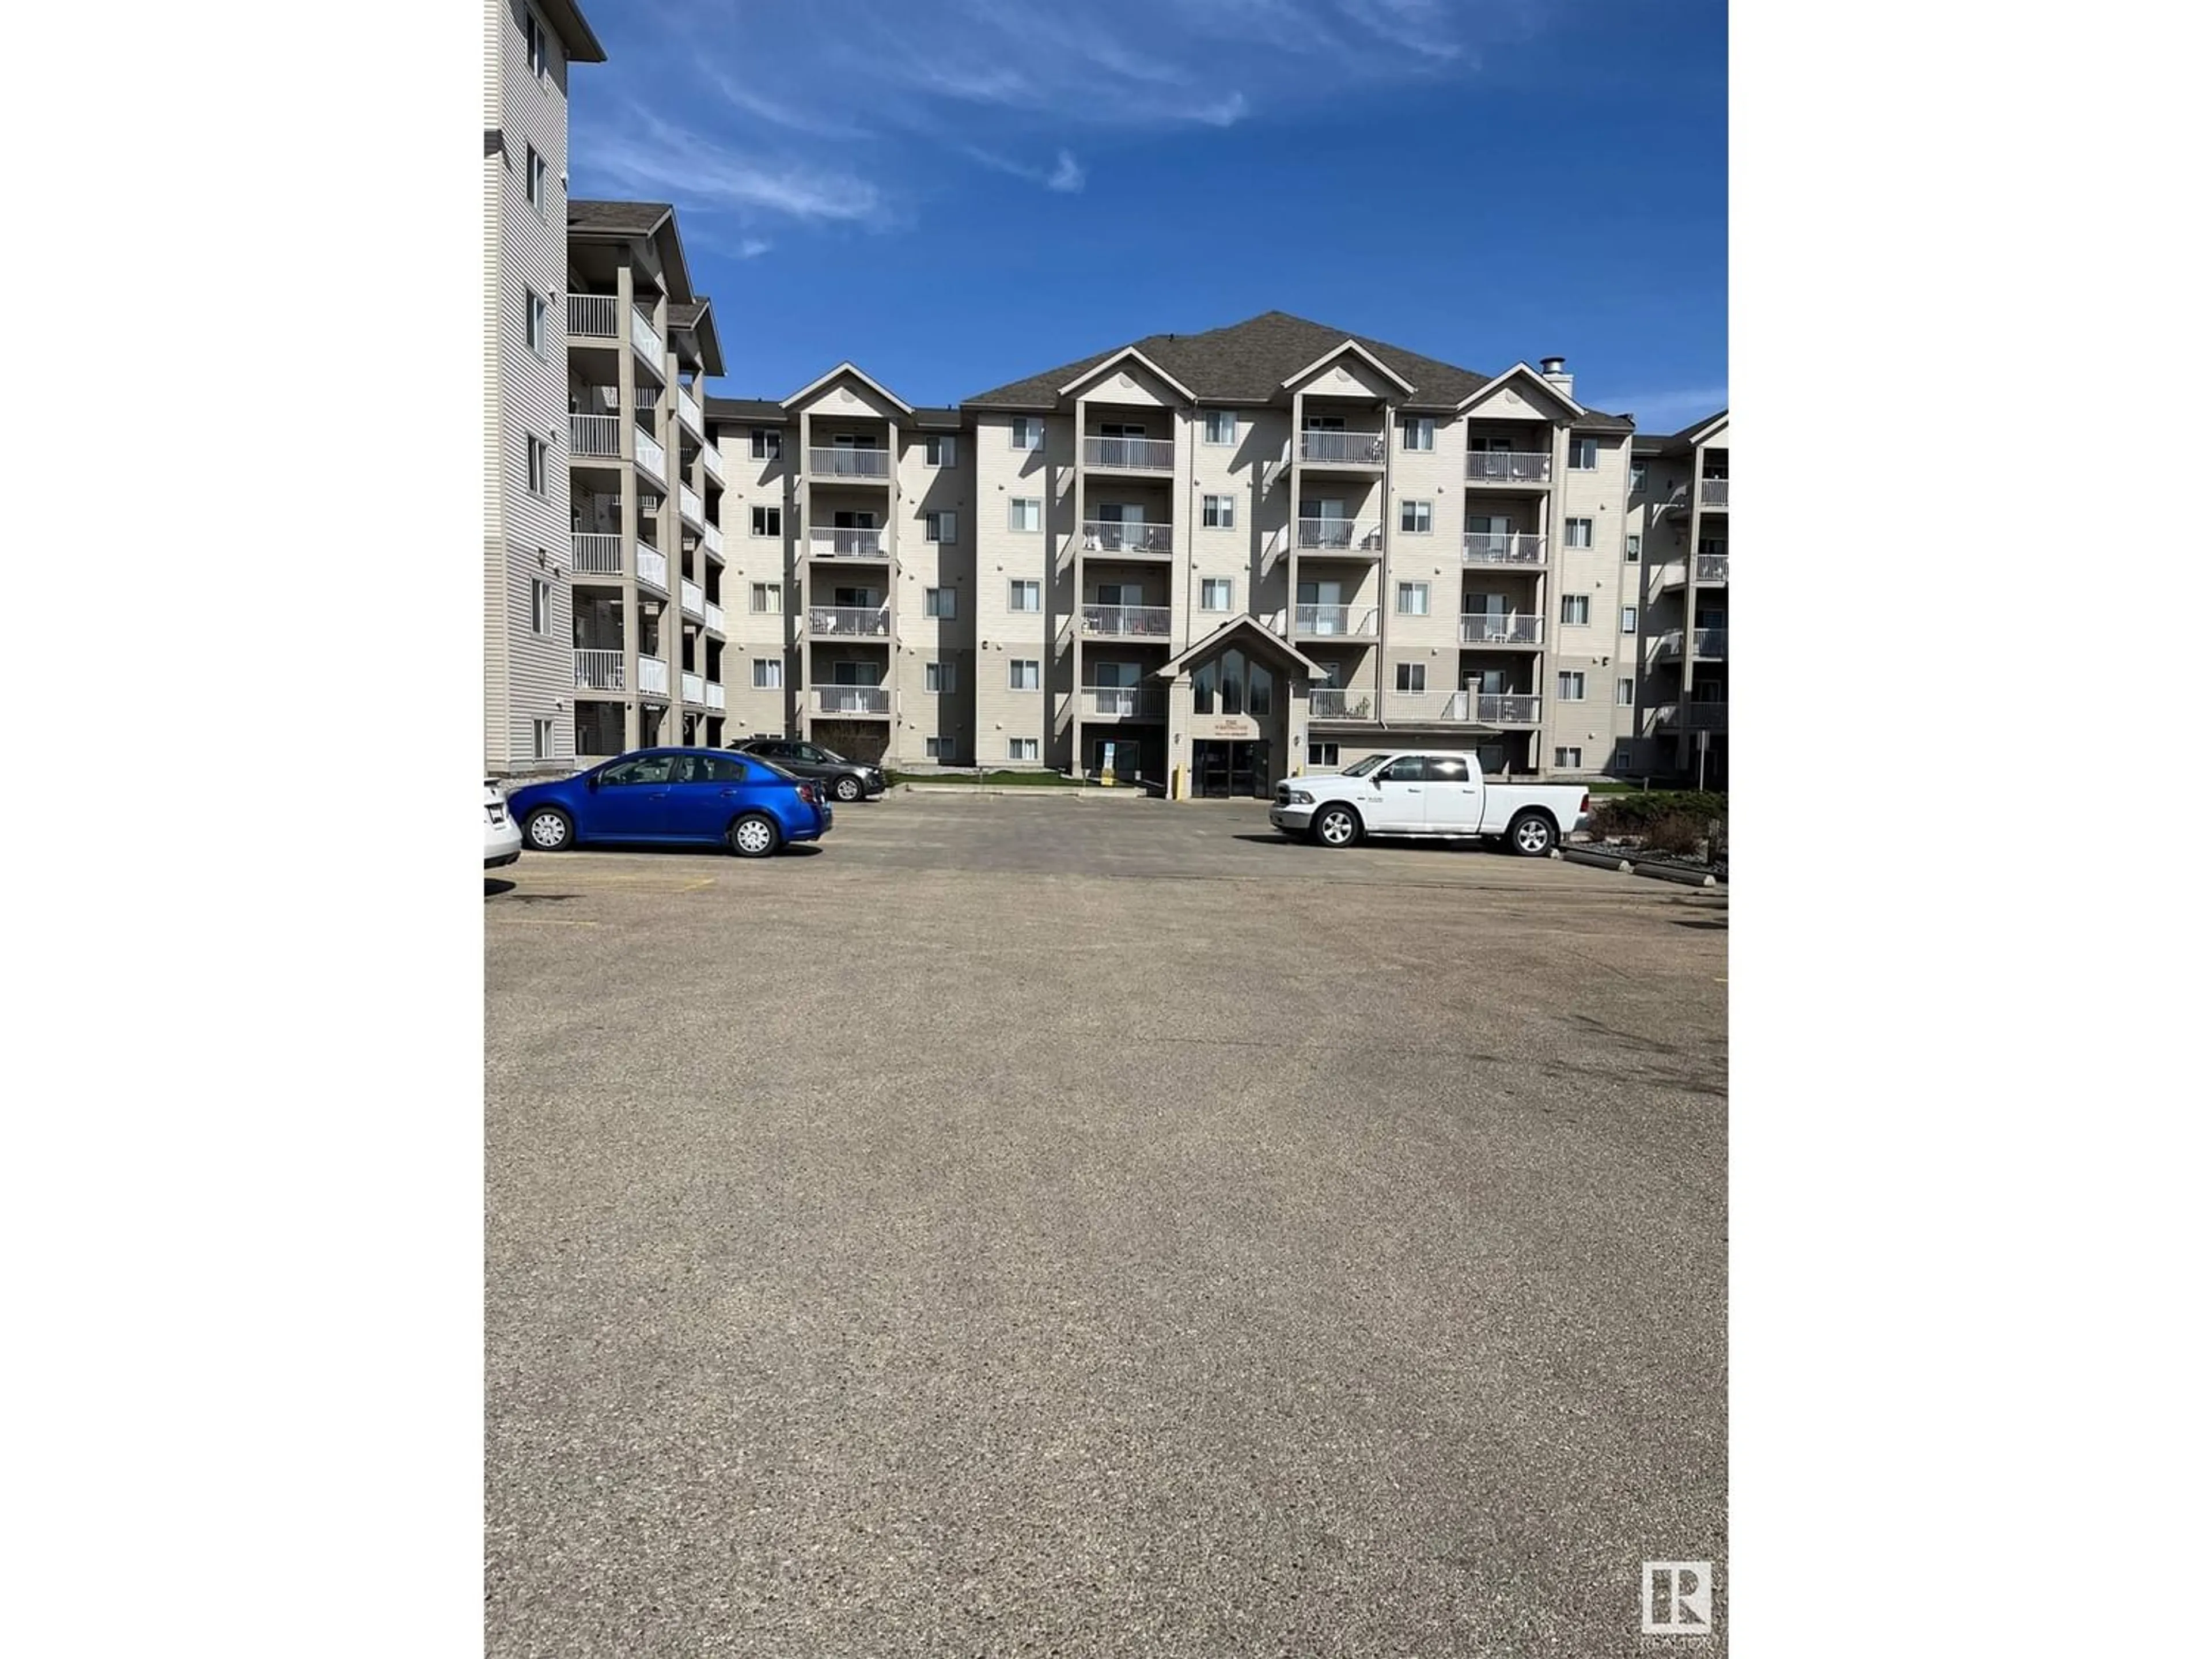 A pic from exterior of the house or condo for #306 7511 171 ST NW, Edmonton Alberta T5T6S7